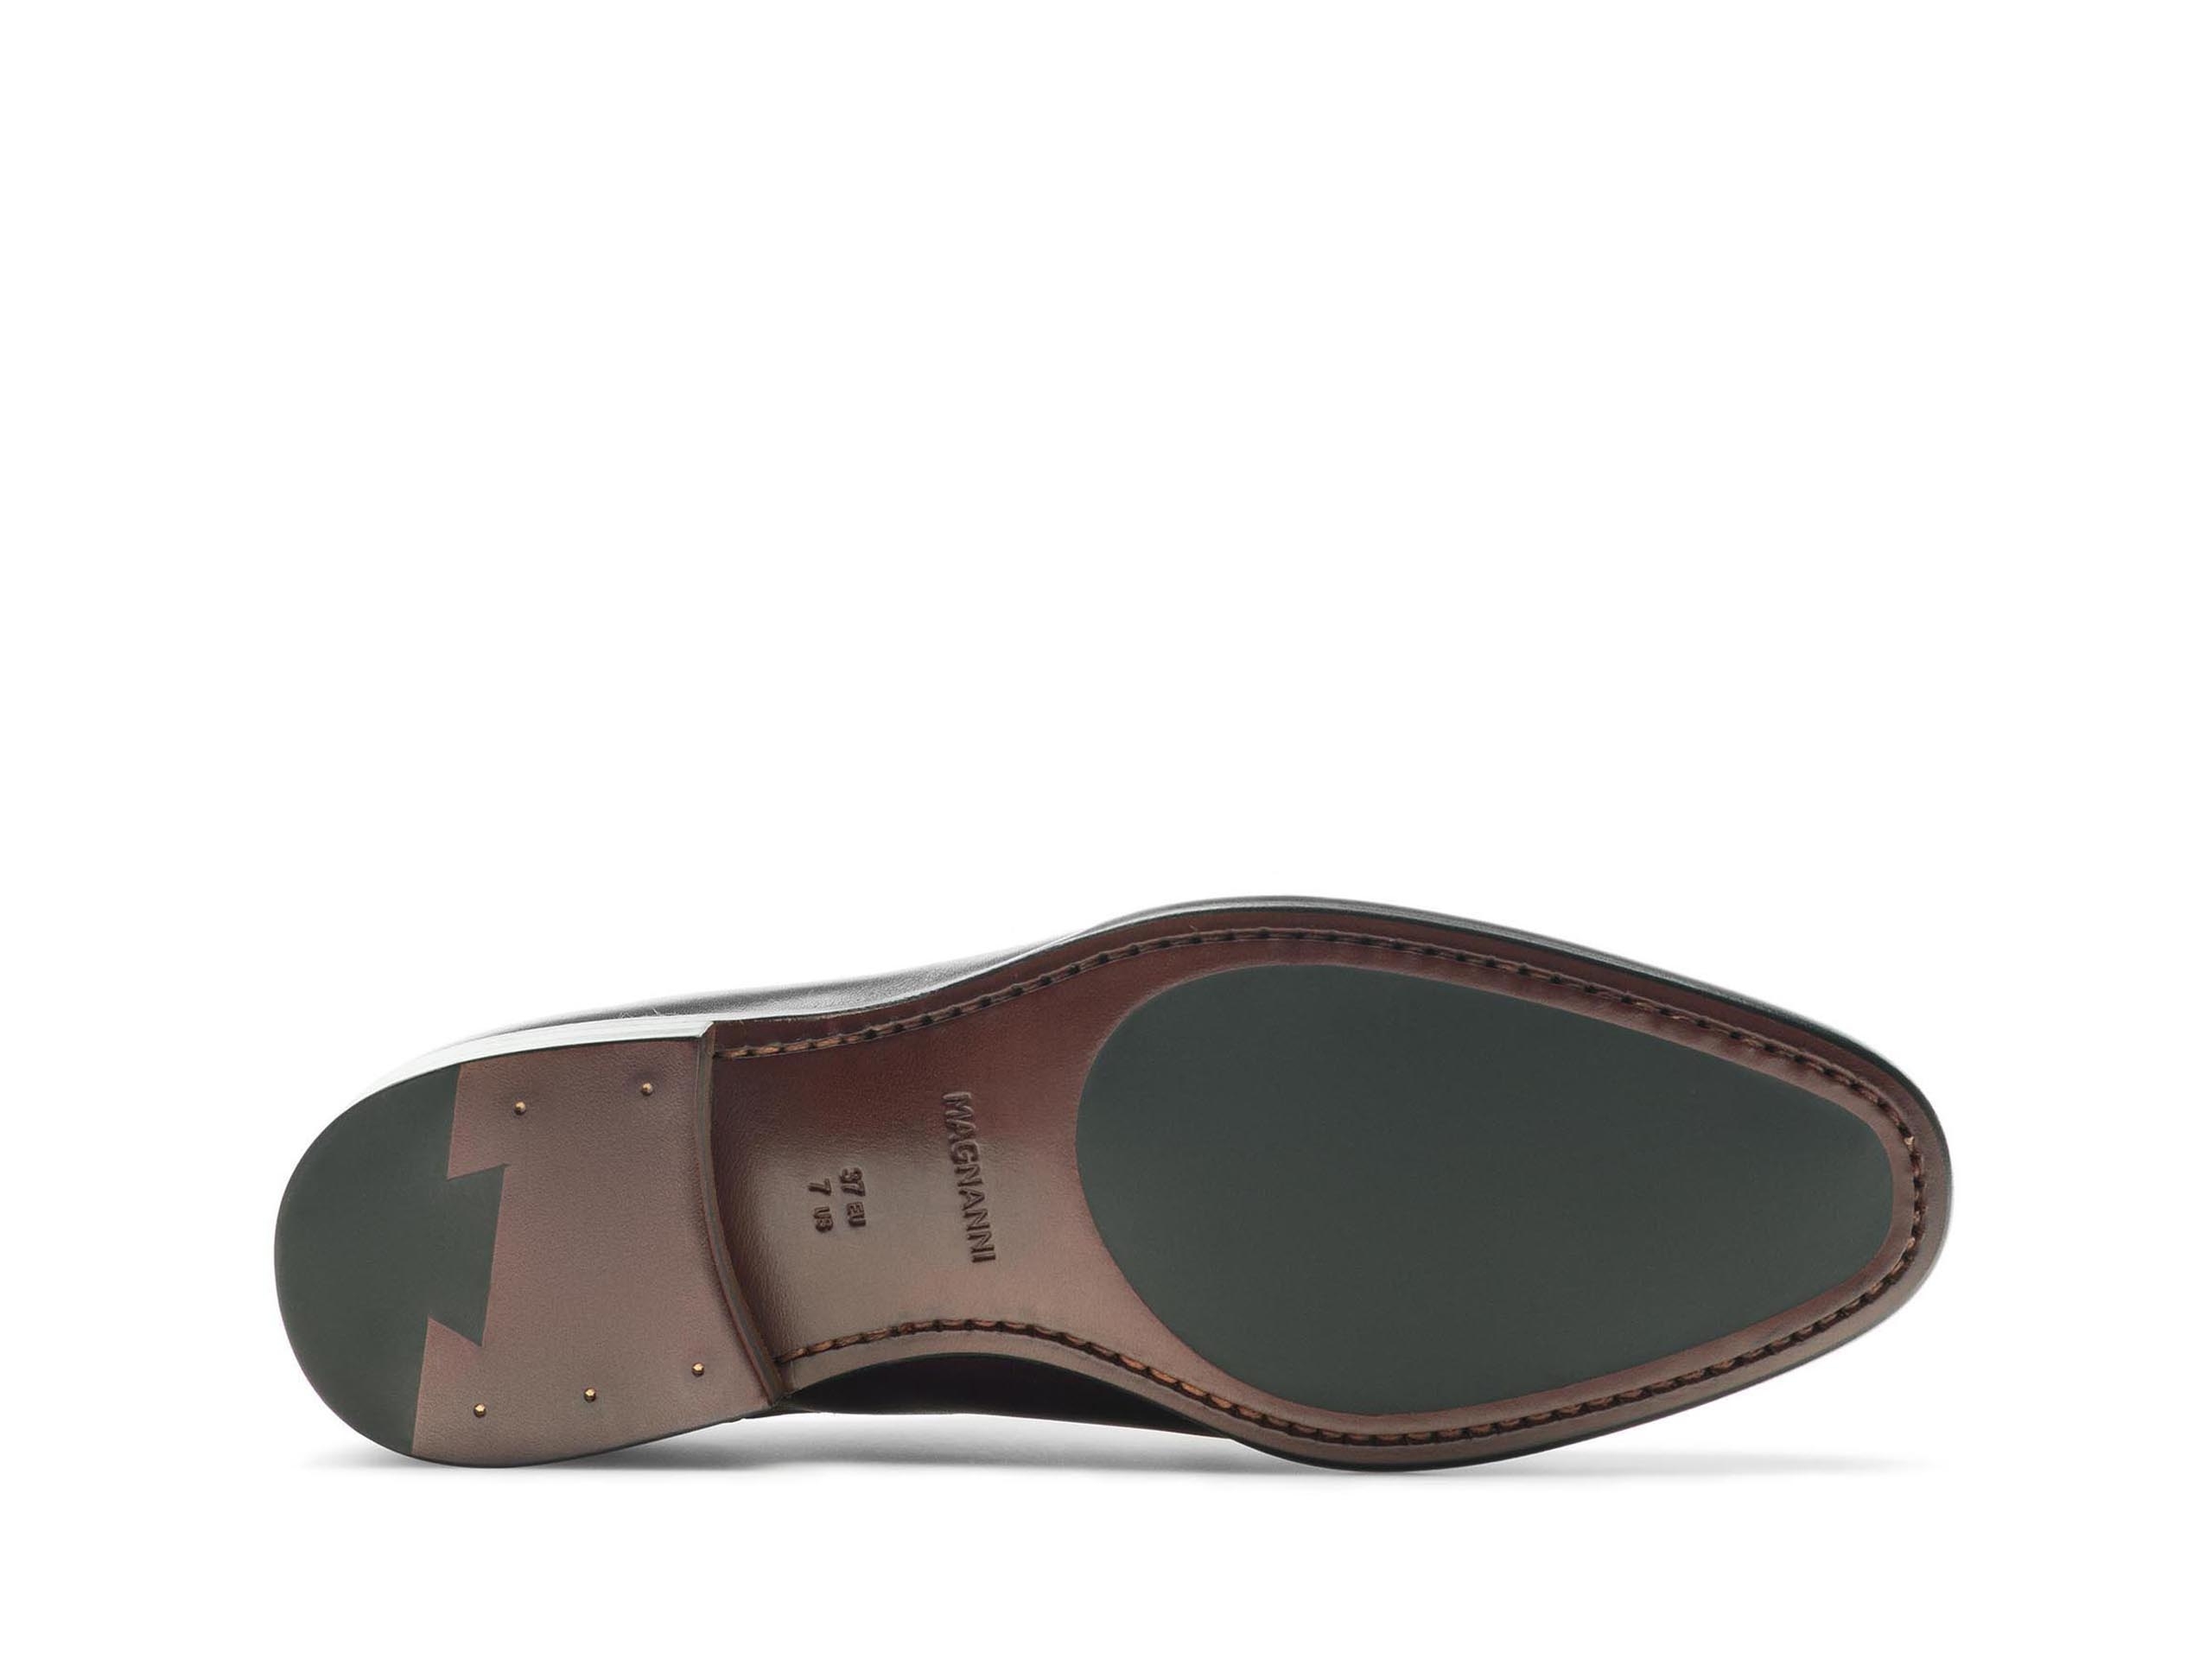 Sole of the Neiva Brown